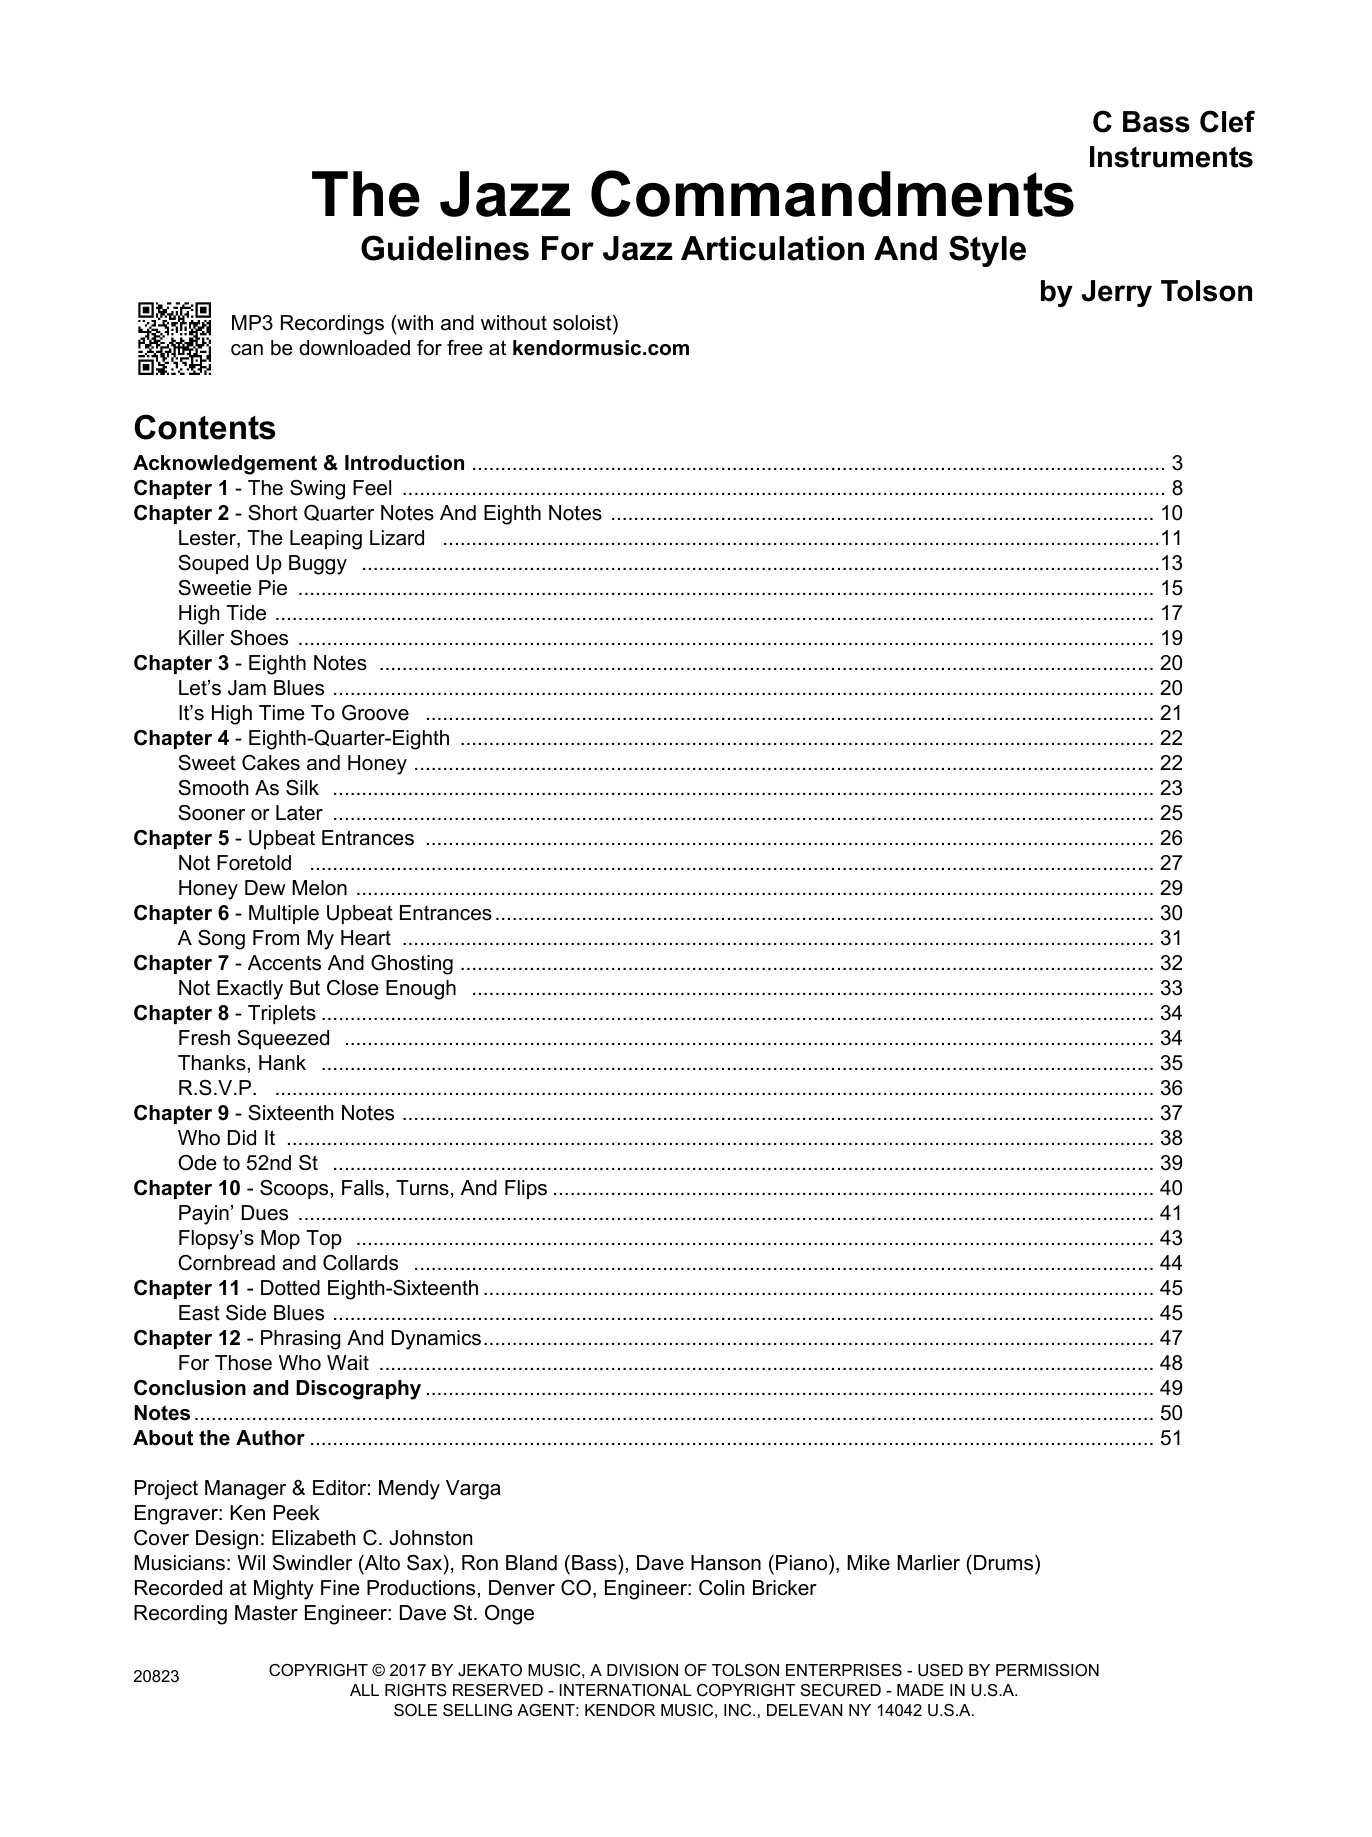 Download Jerry Tolson The Jazz Commandments (Guidelines For J Sheet Music